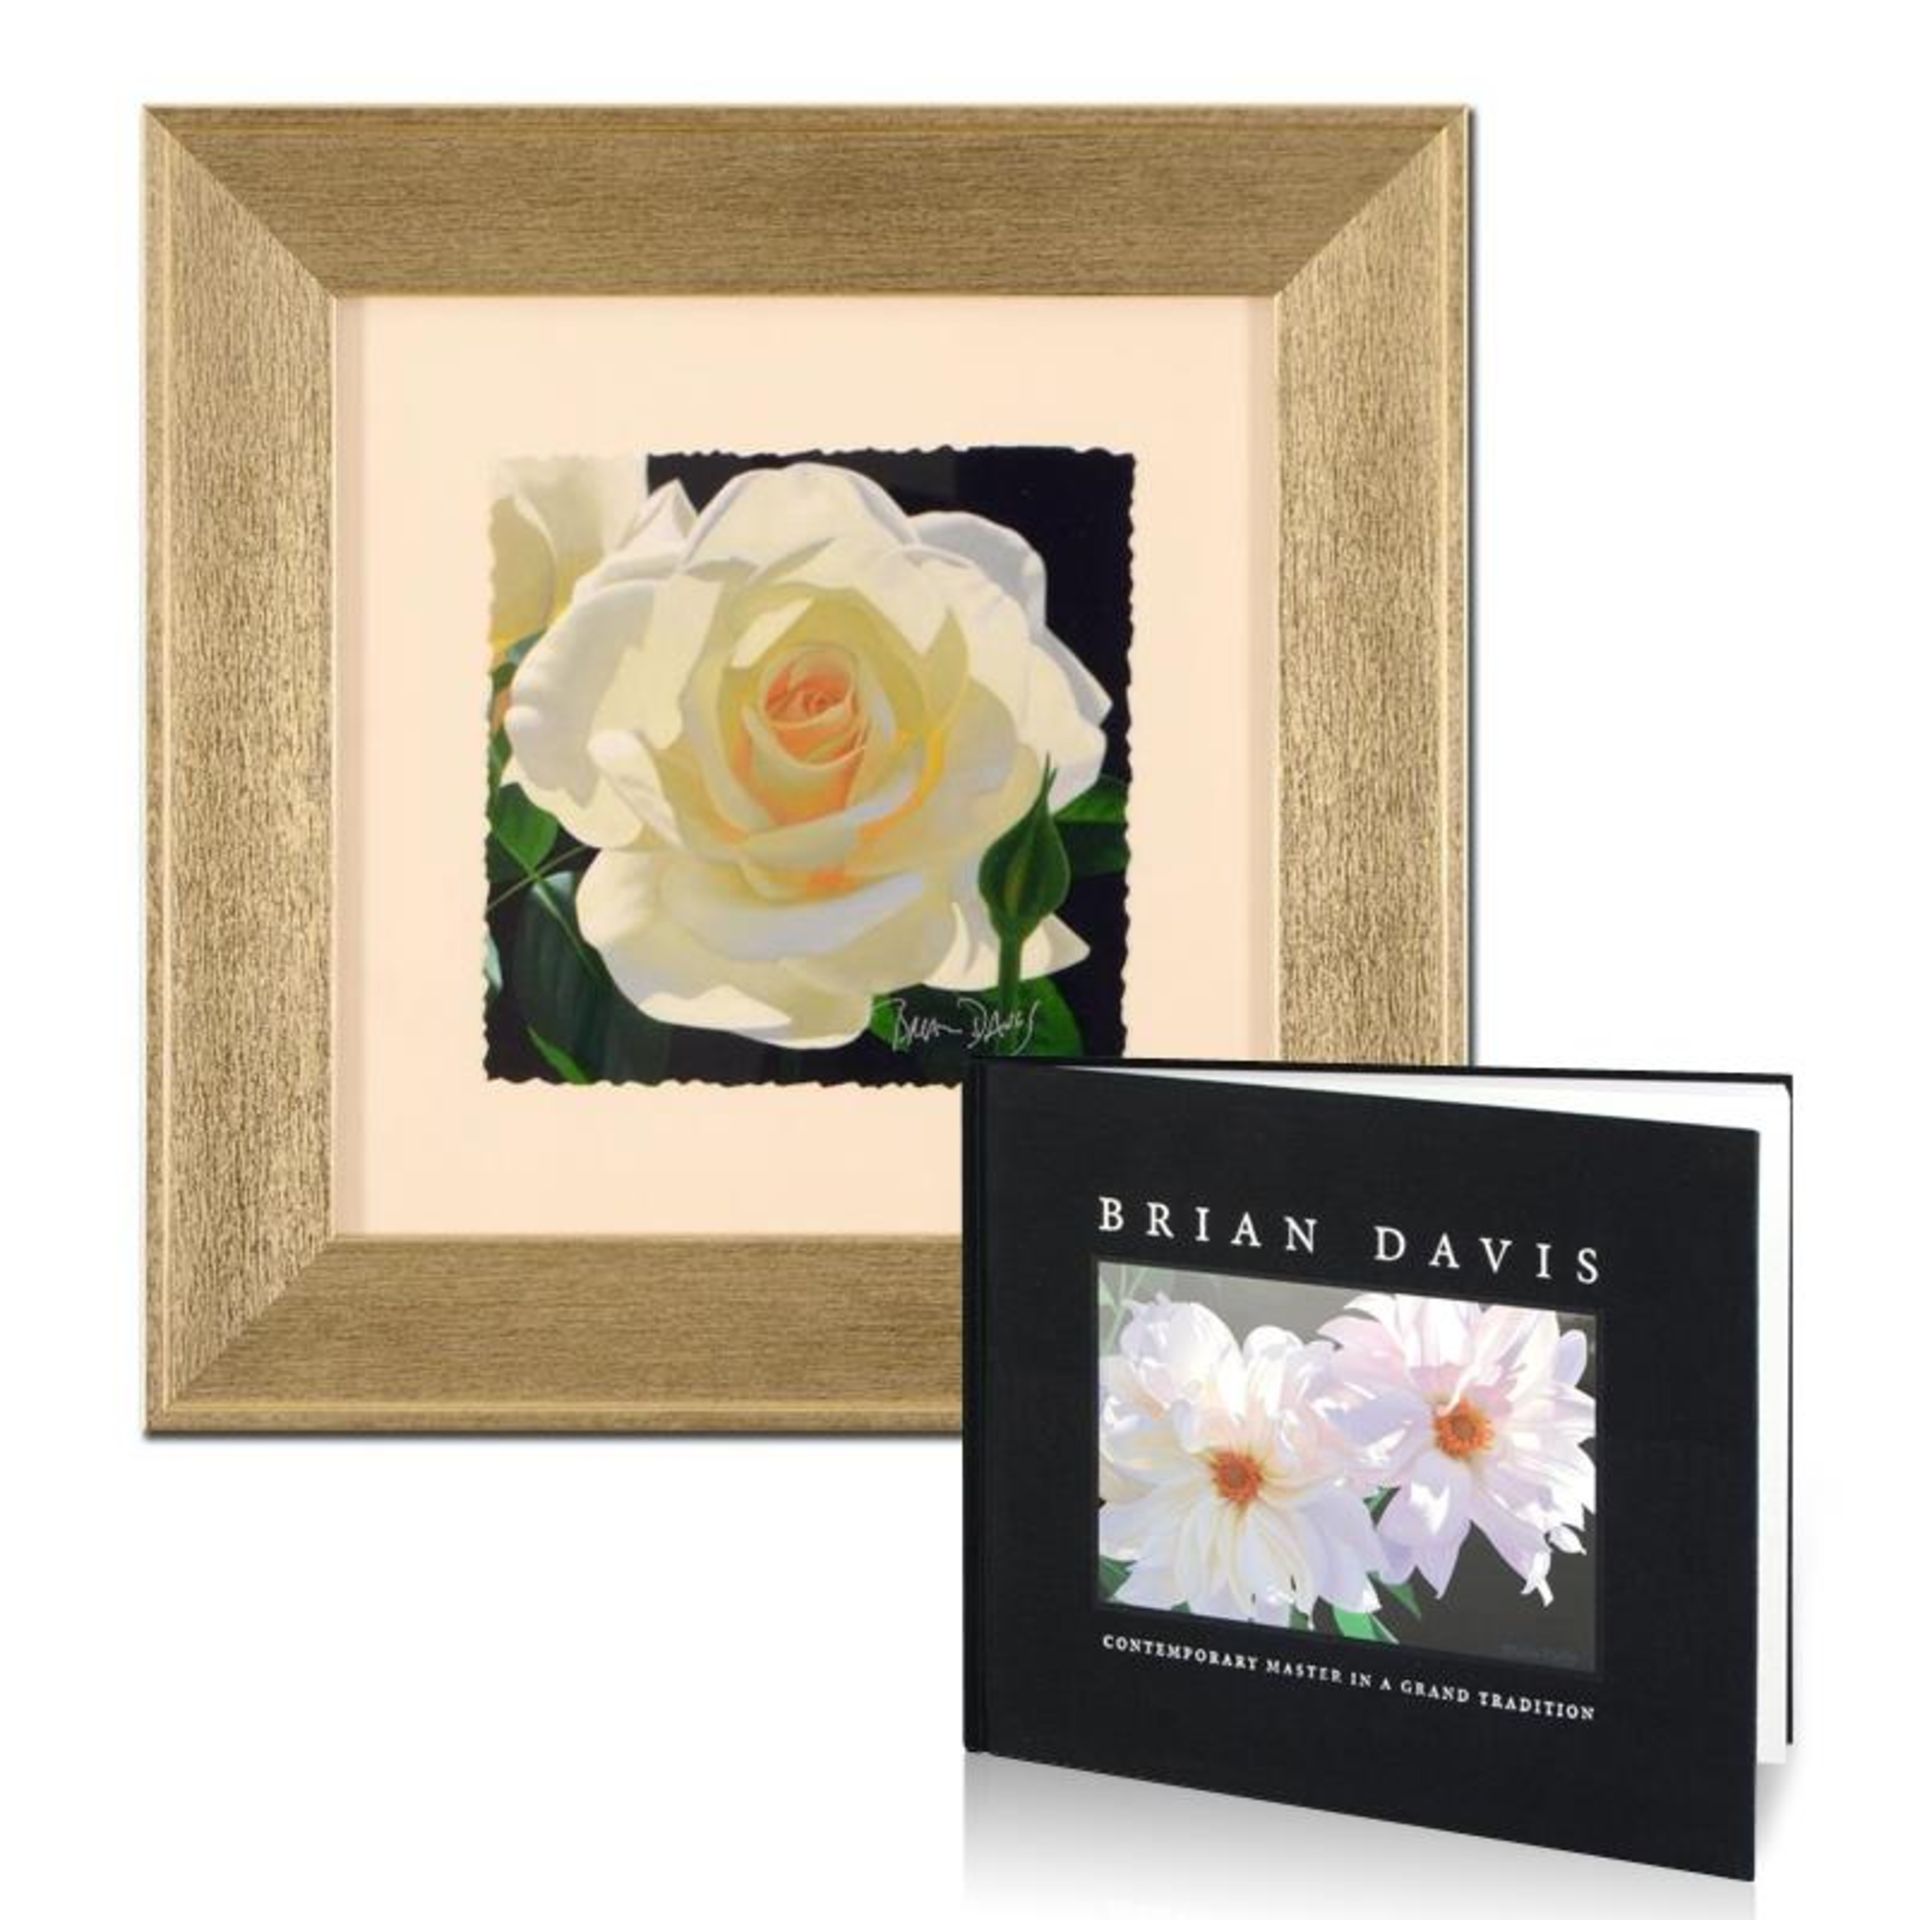 Brian Davis, "French Lace with Bud", Limited Edition Giclee, Numbered and Hand S